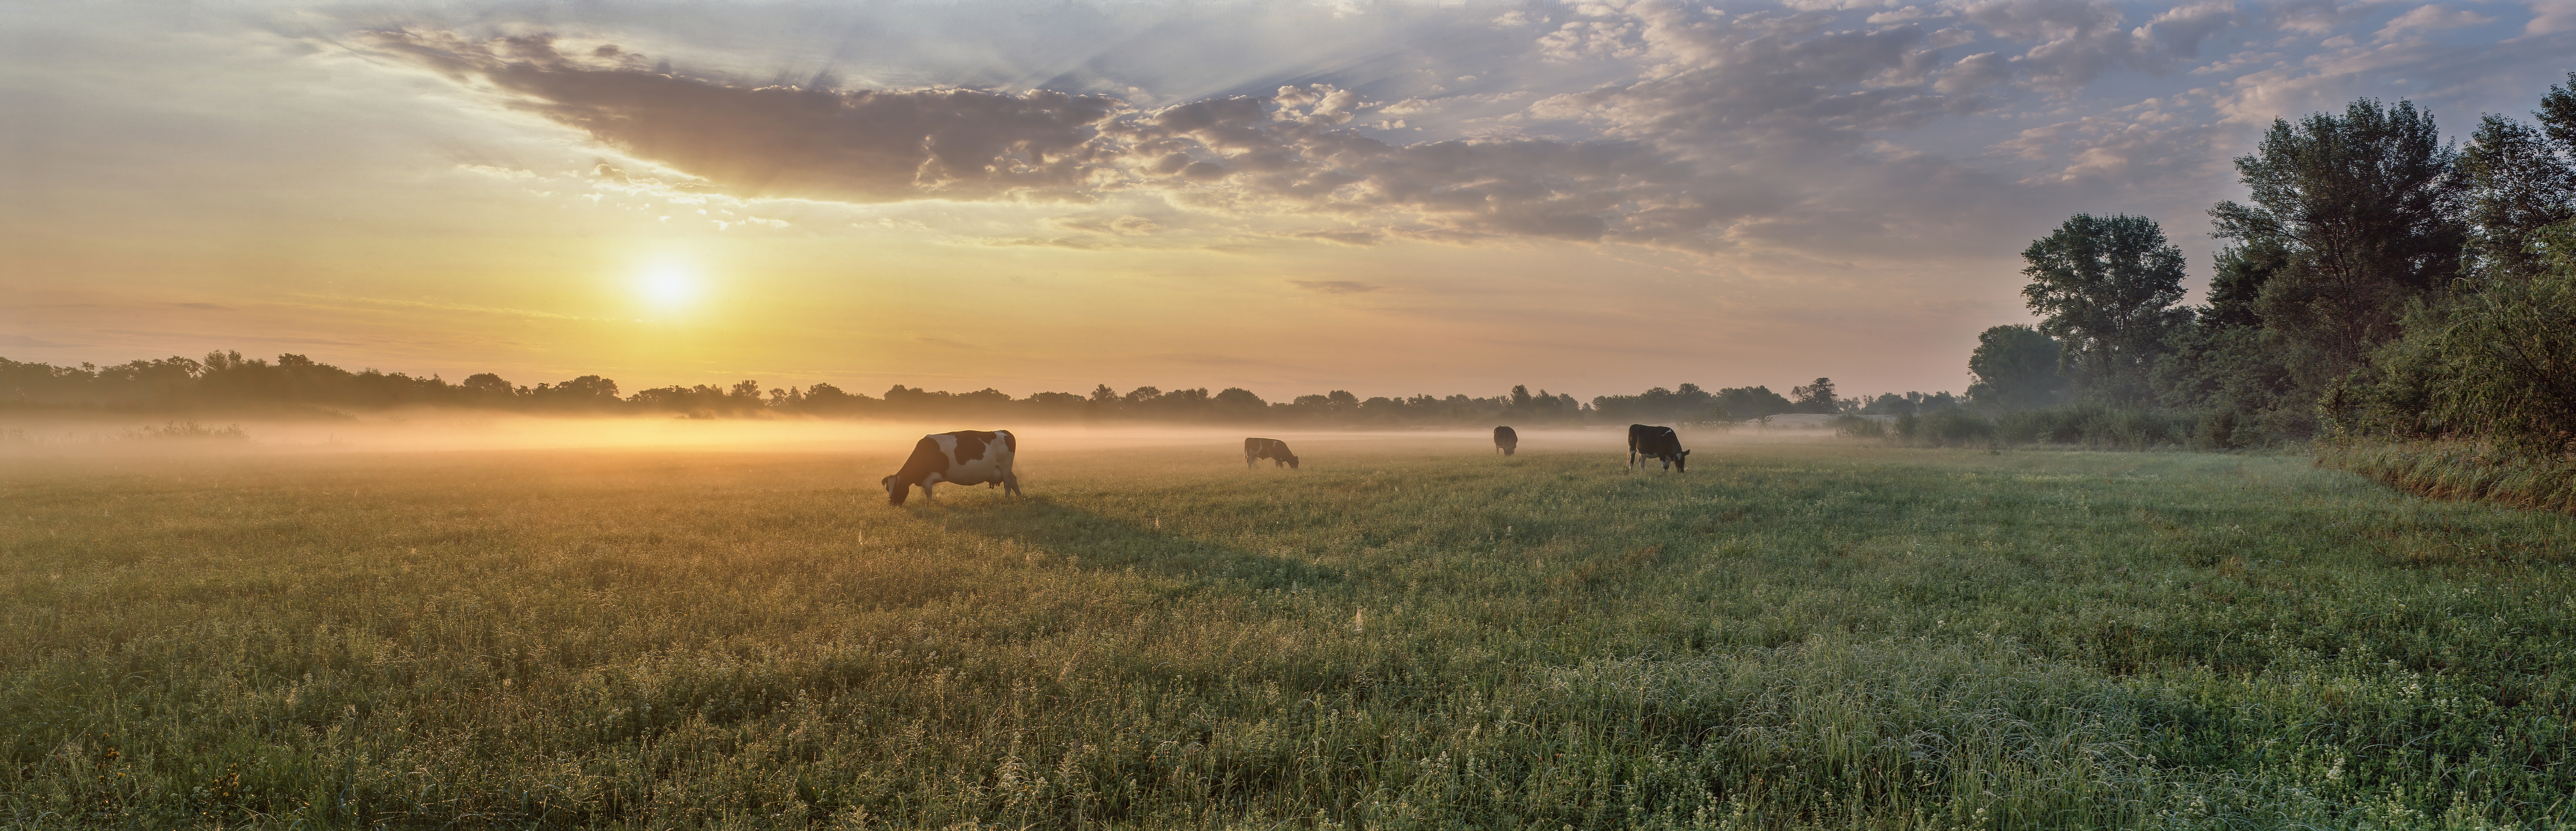 Panorama of grazing cows in a meadow with grass covered with dew